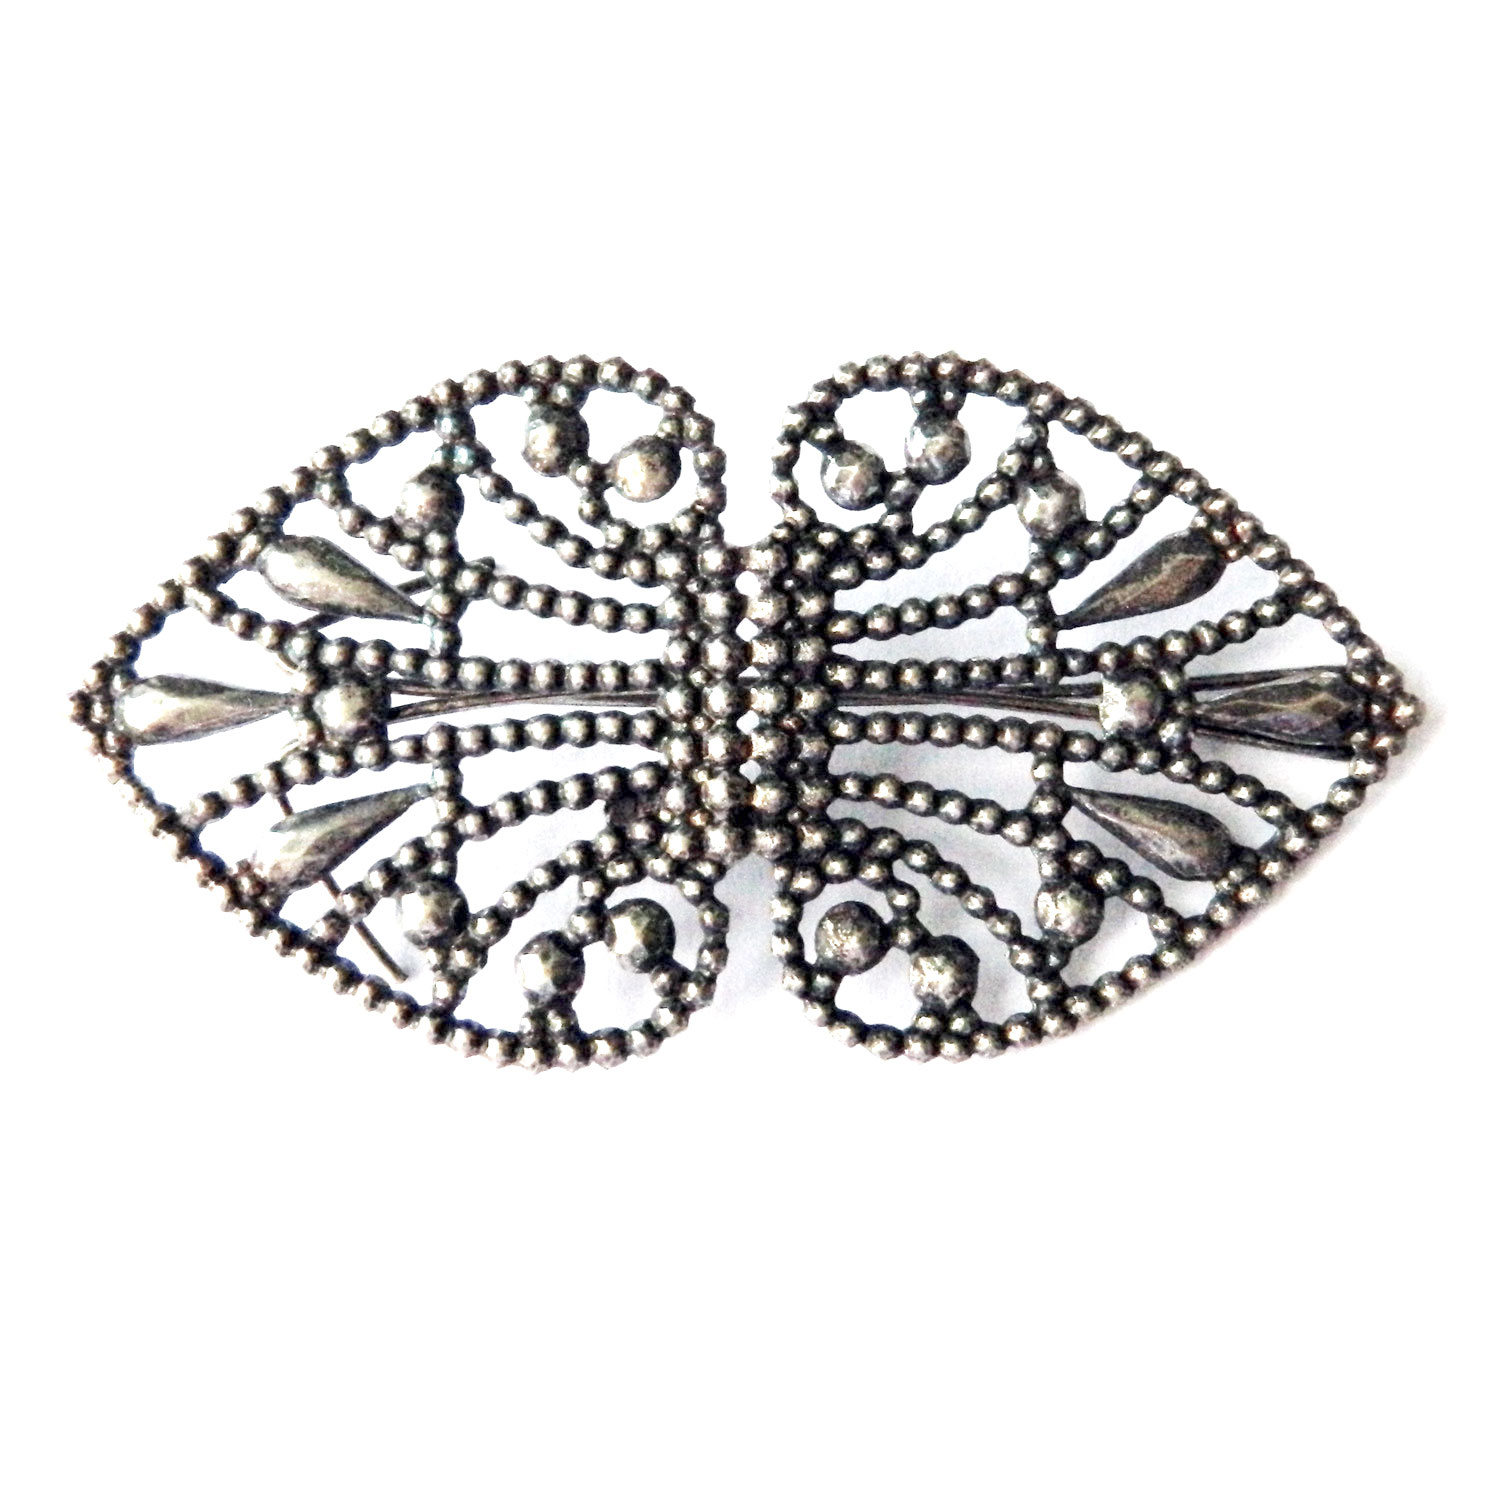 Vintage Haskell hair clip